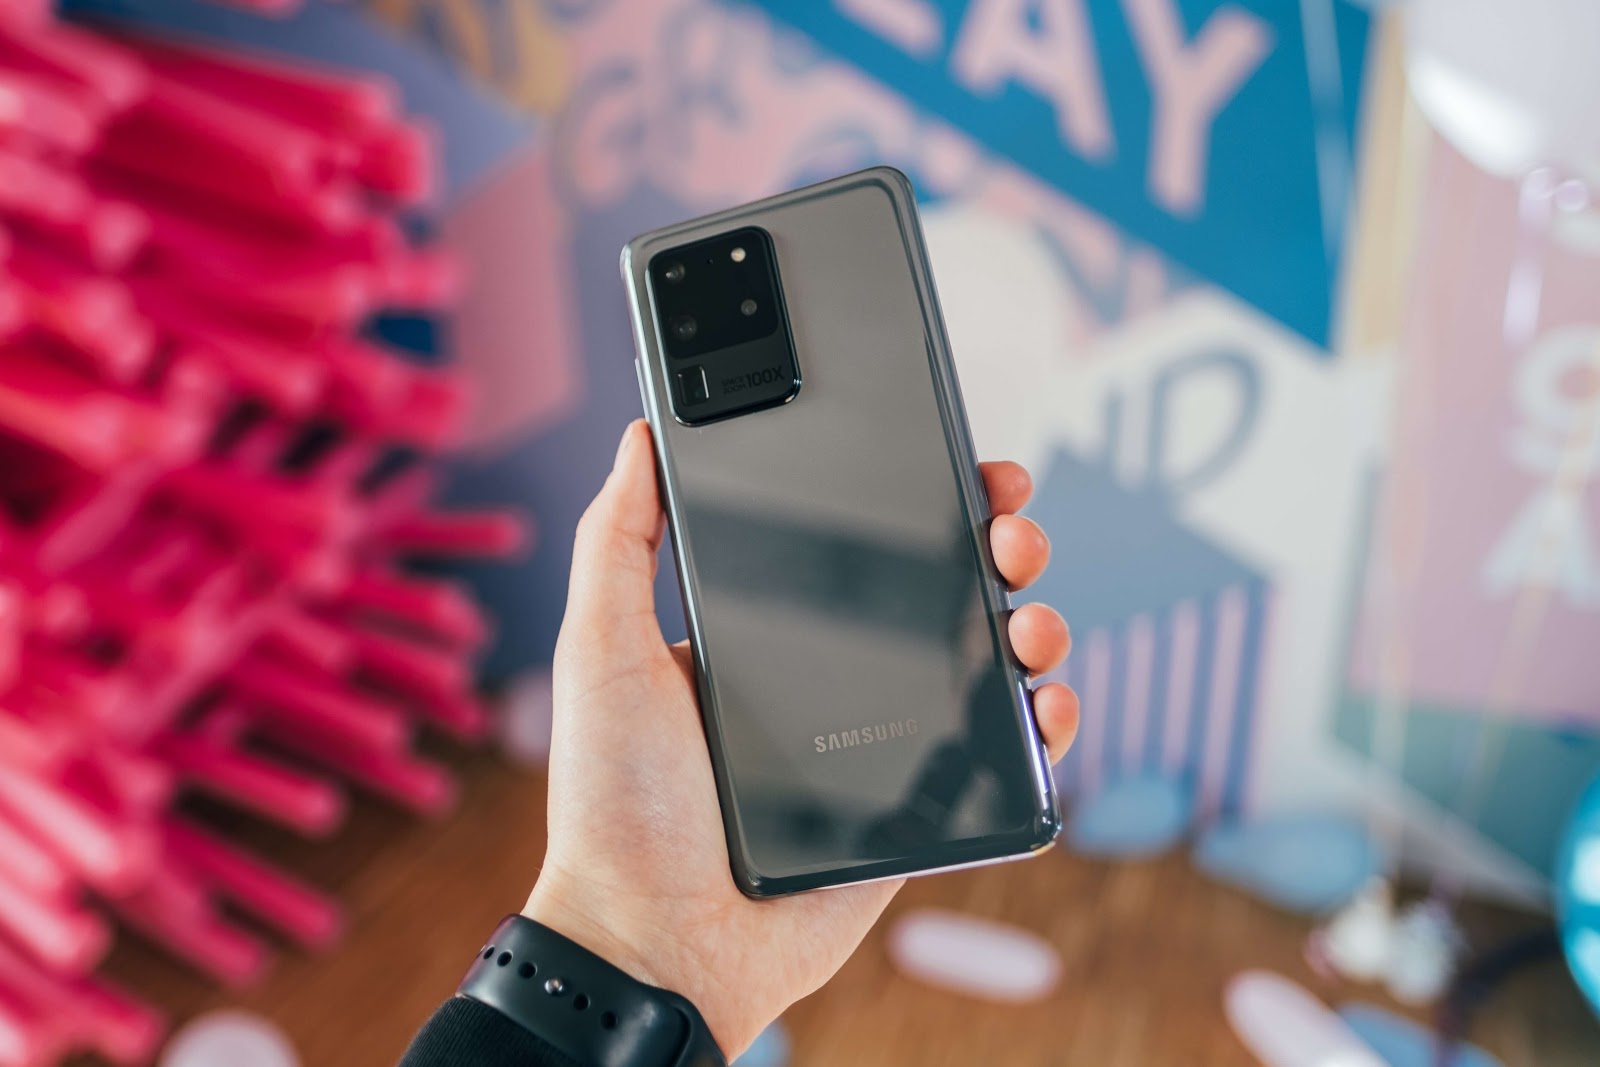 the most powerful smartphones you can buy in 2020 - Samsung Galaxy S20 Ultra 5G